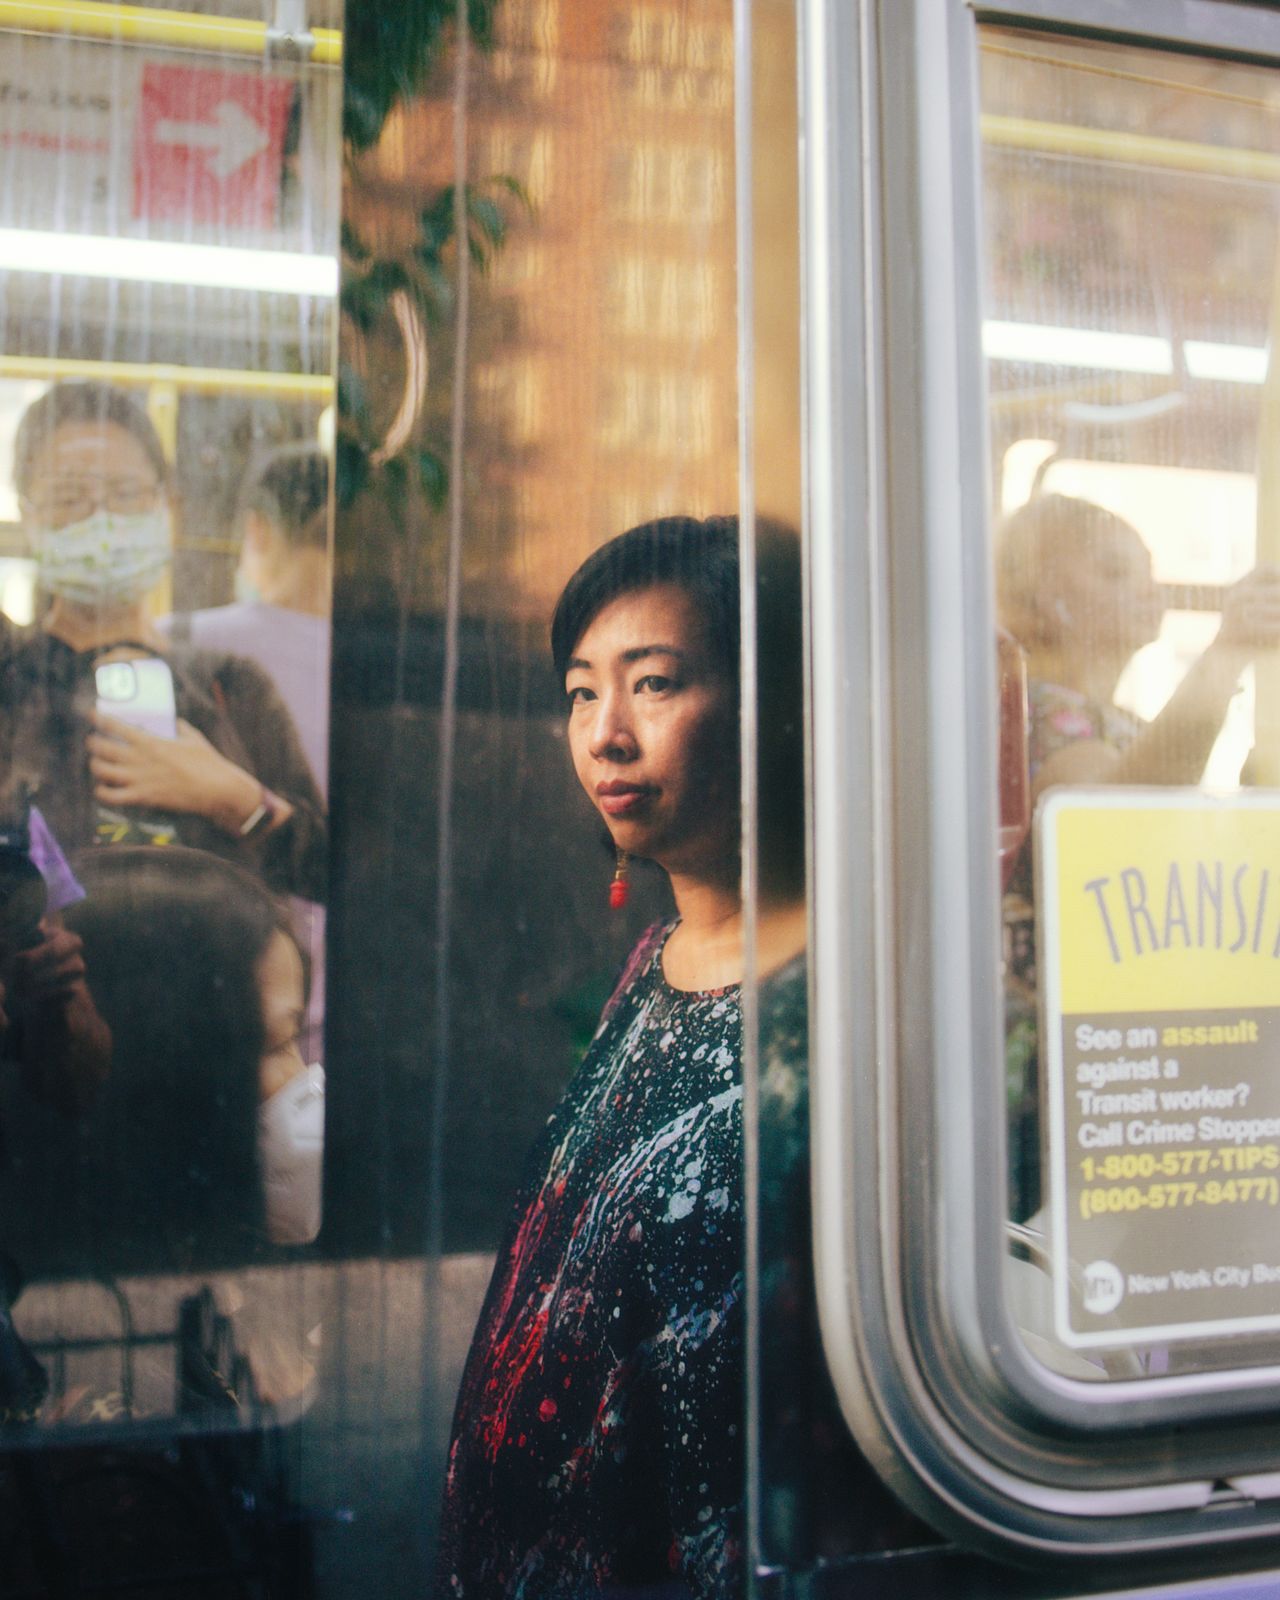 At a photoshoot in Flushing in August, Liu suddenly became emotional while sitting at the bus stop where she used to spend two hours waiting on her commute.